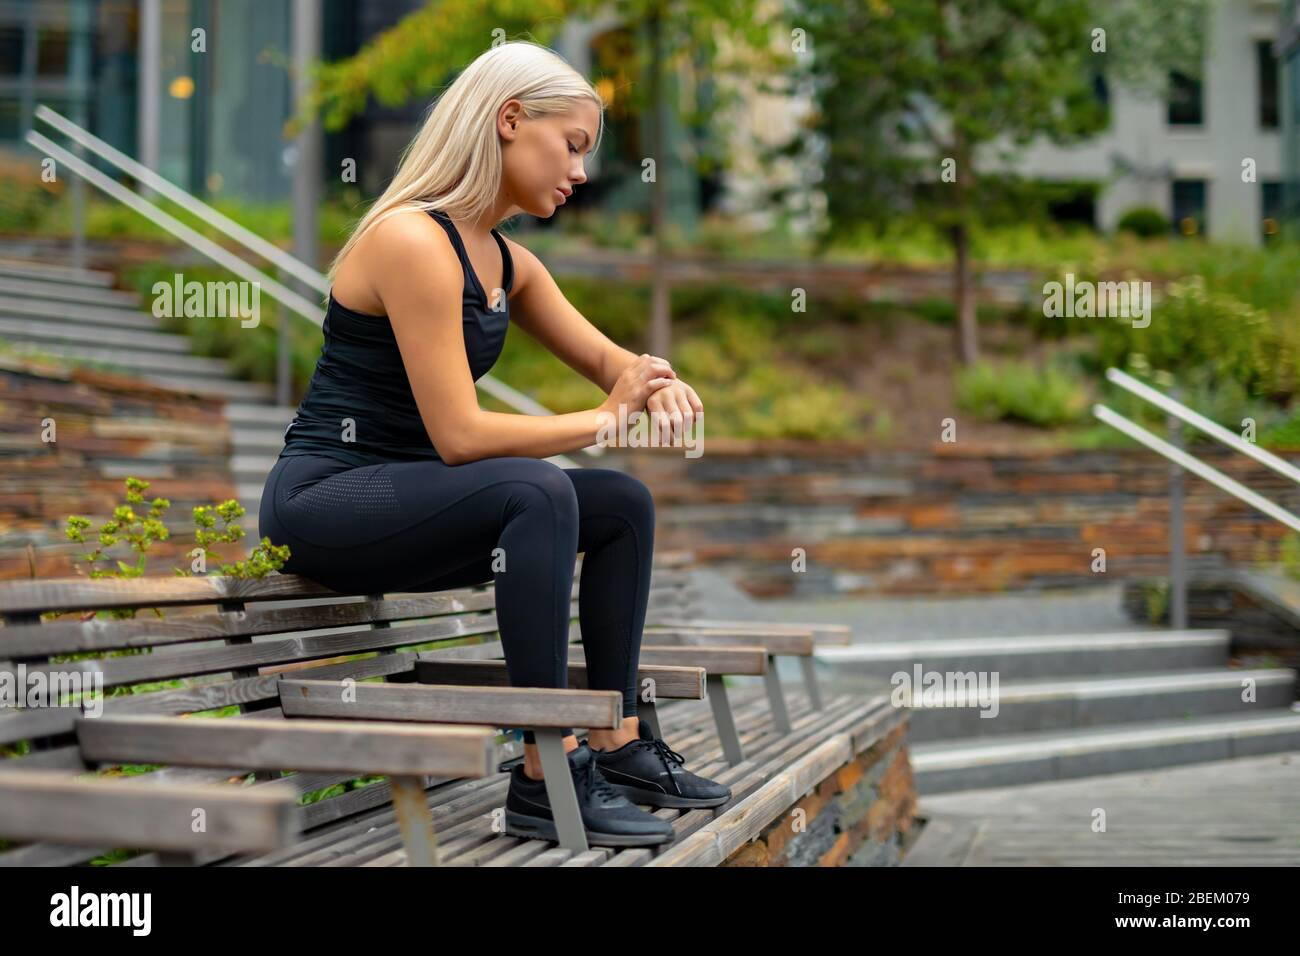 Fit woman setting up fitness smart watch device before running Stock Photo